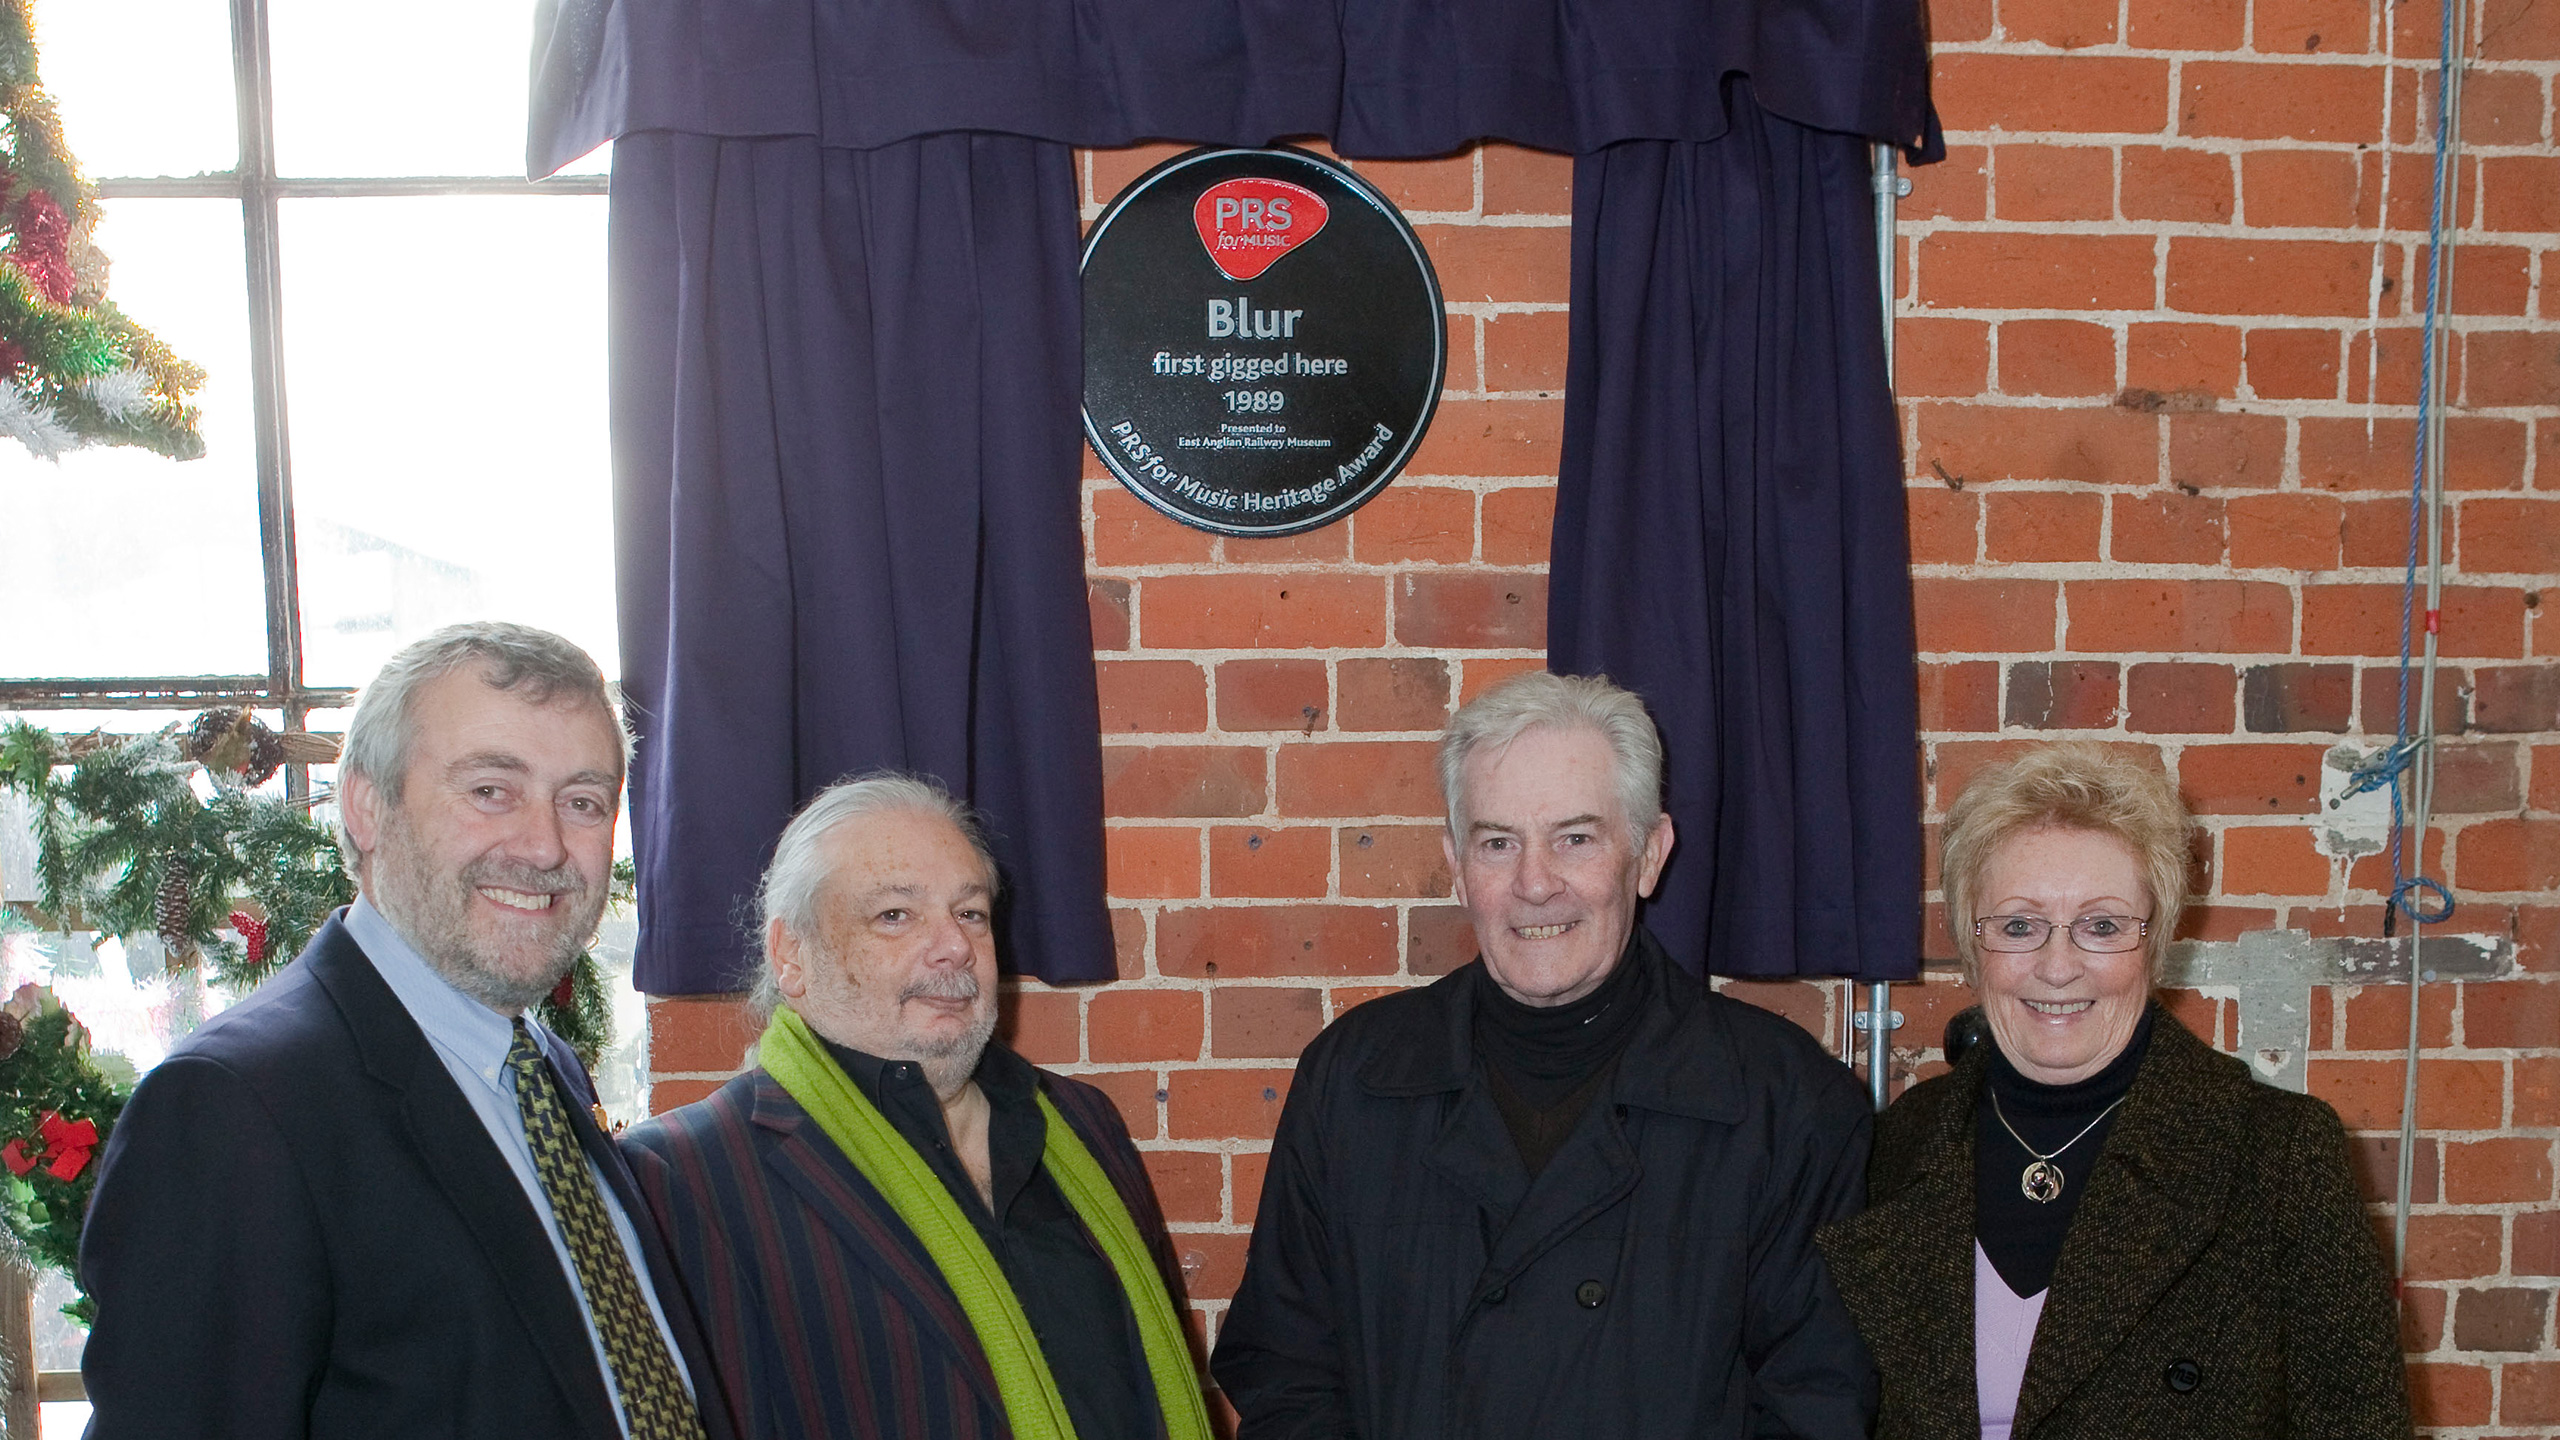 Staff from Good Sheds at East Anglian Railway Museum with their Heritage Award plaque